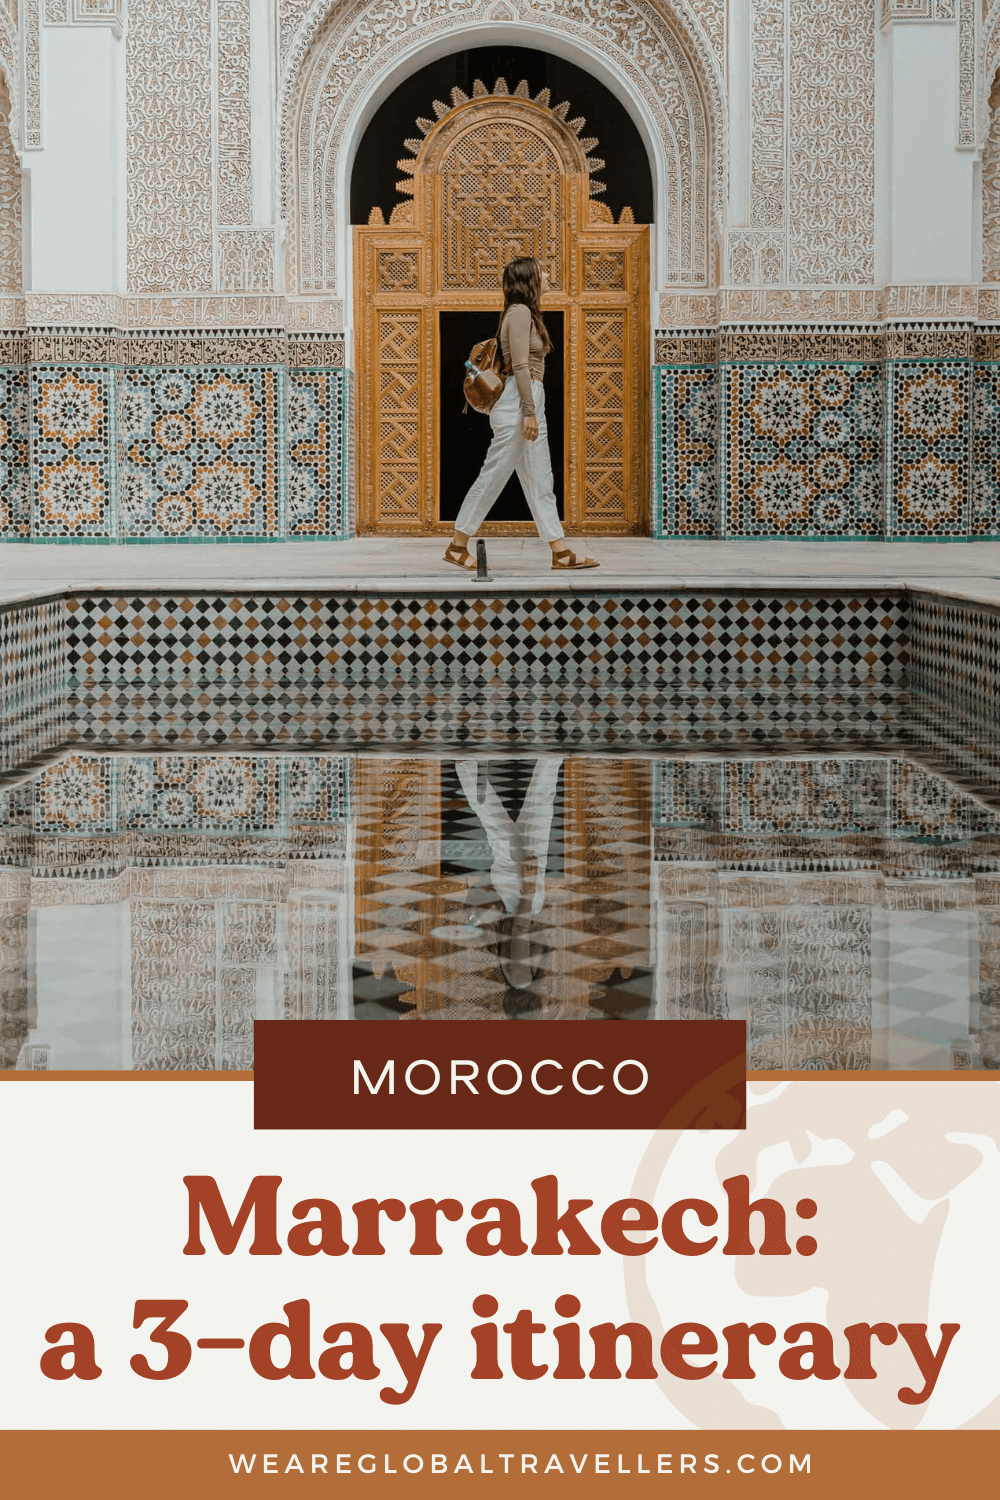 A 3-day itinerary for Marrakech